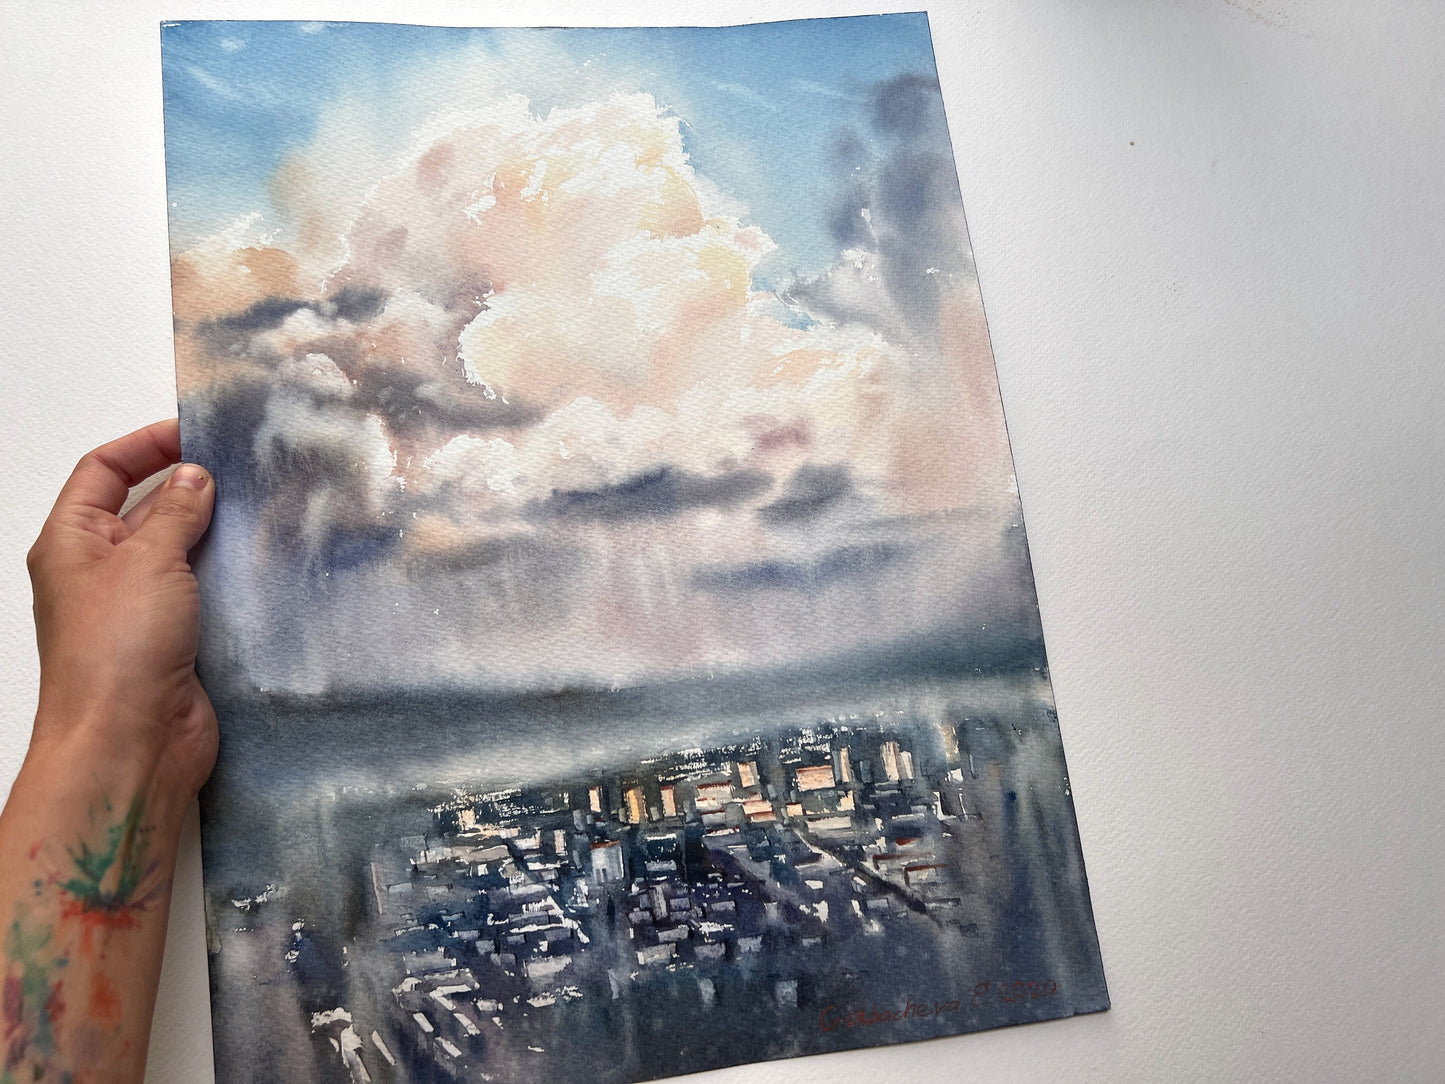 Cyberpunk Painting Original, Watercolor City Above The Cloud, Rainy Clouds, Cityscape Wall Art Decor, Gift